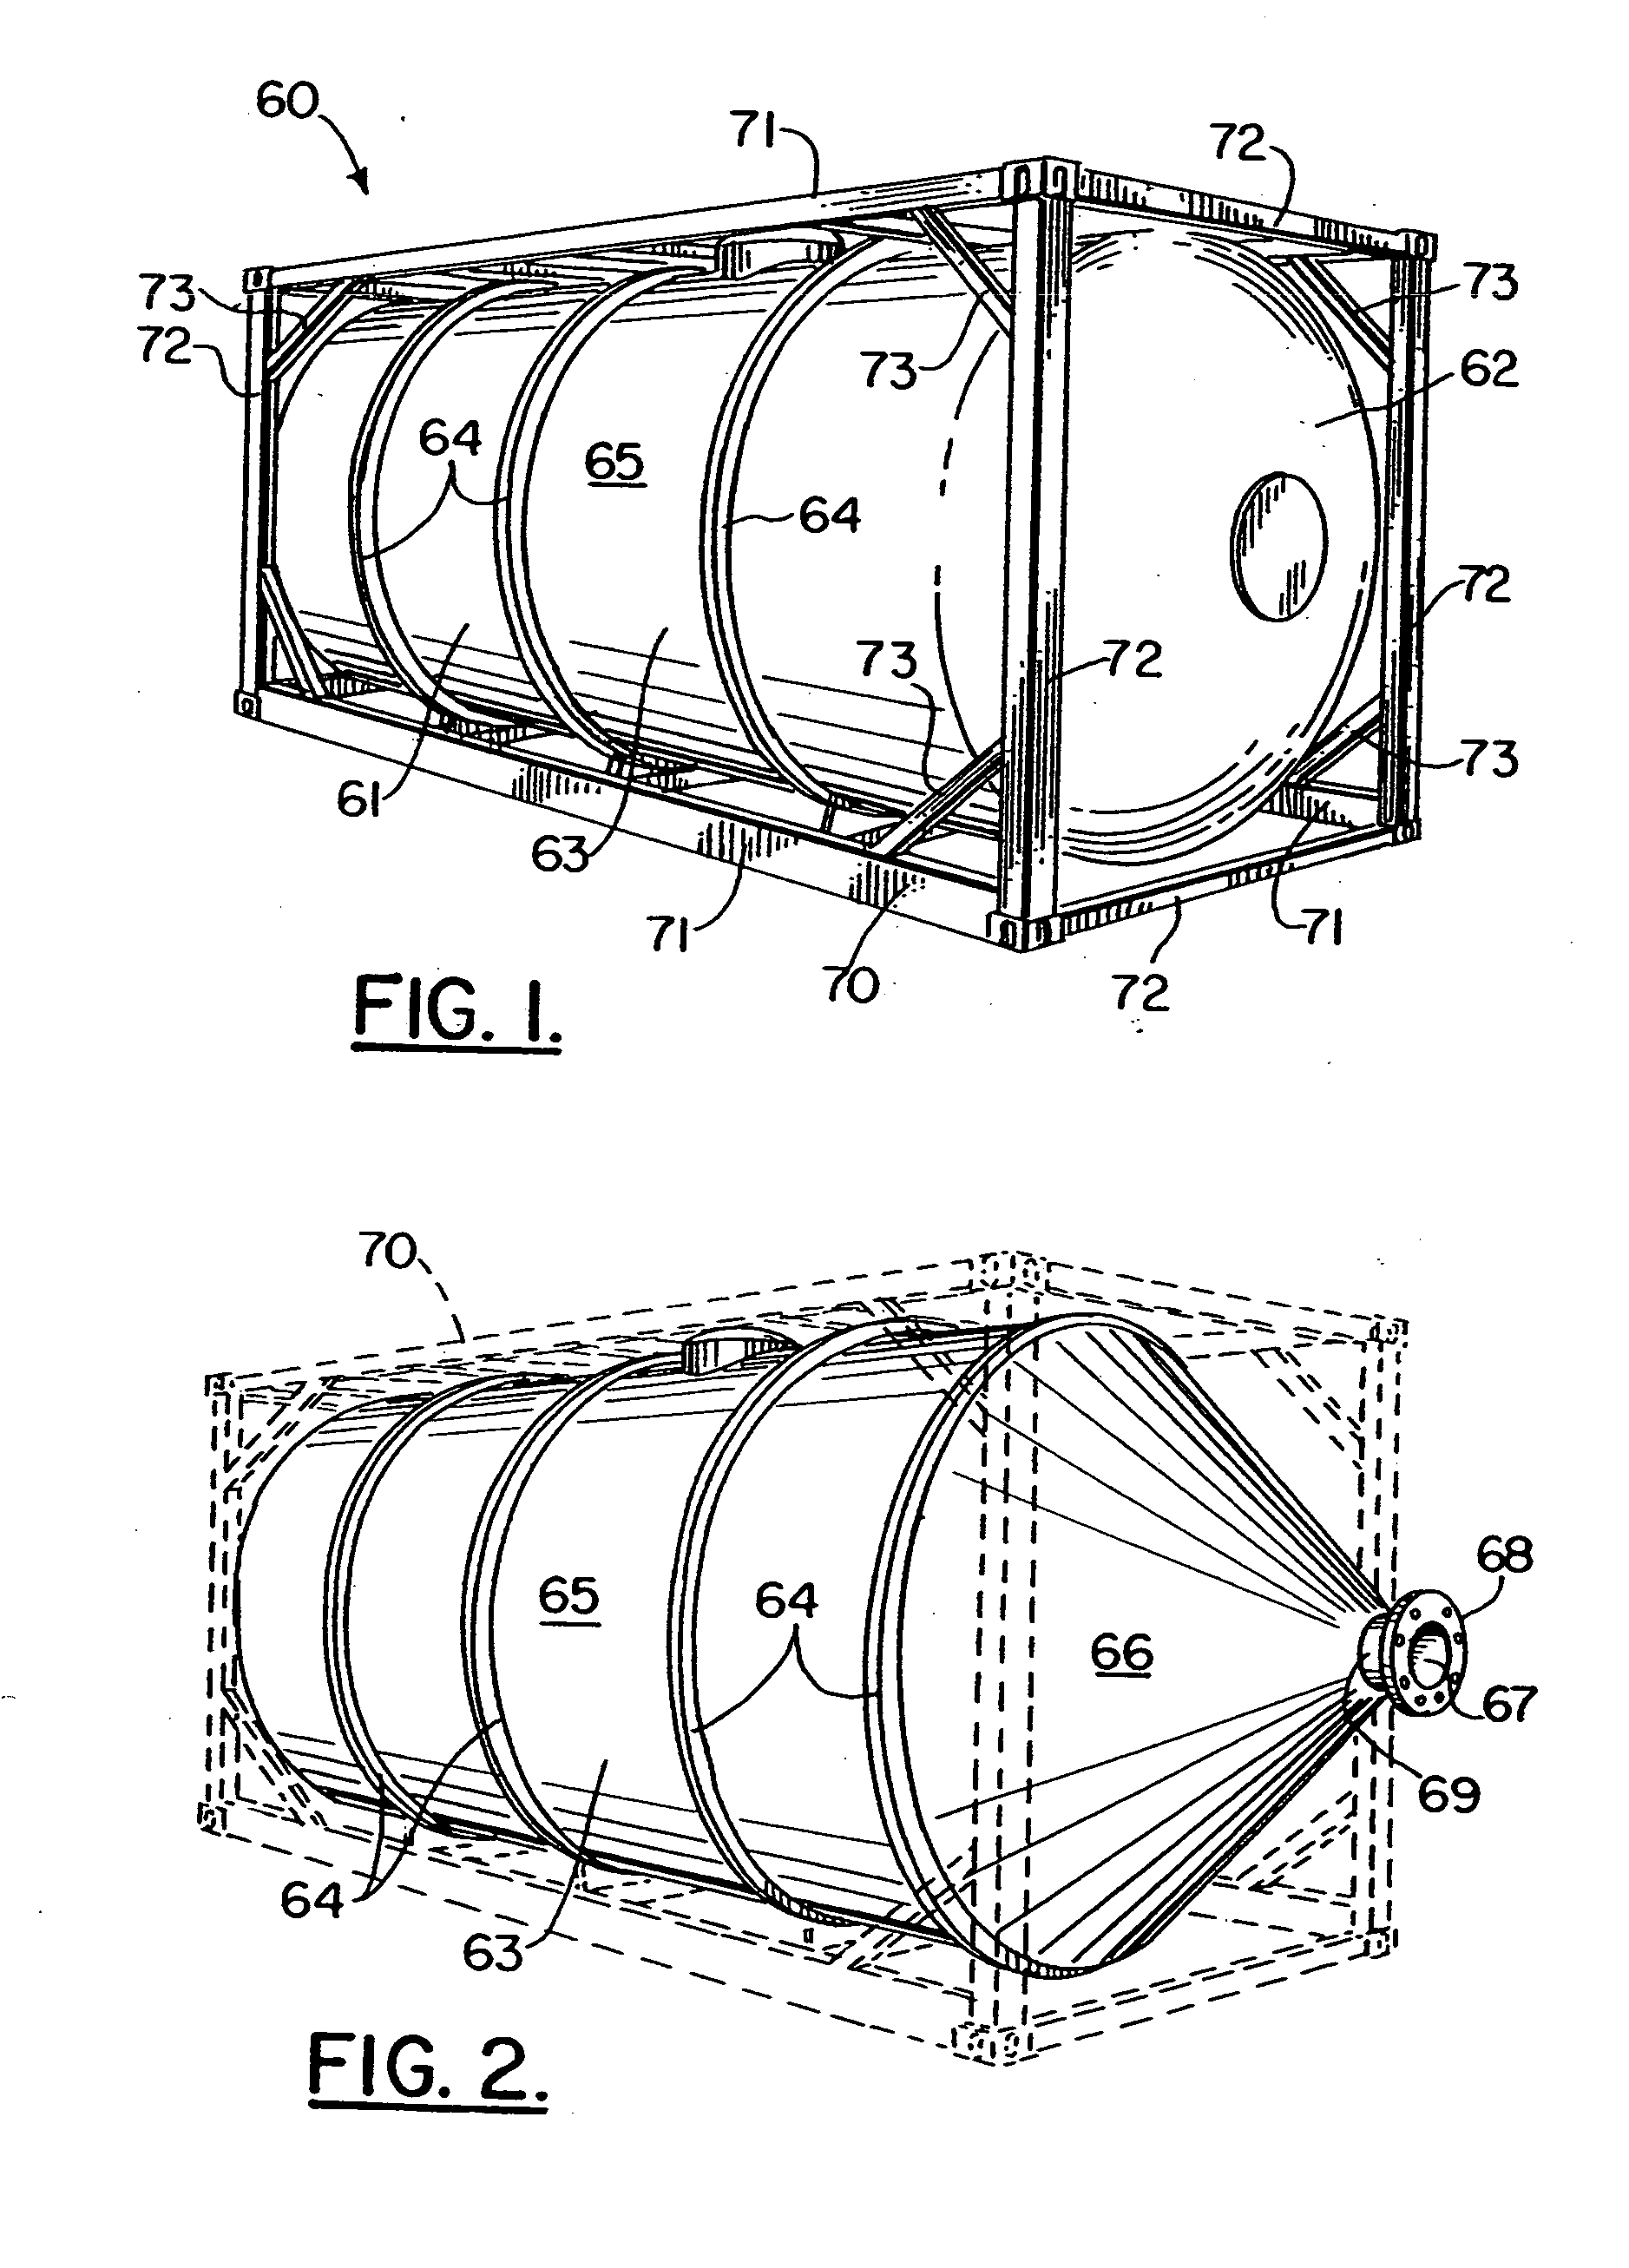 Method and apparatus for supplying bulk product to an end user